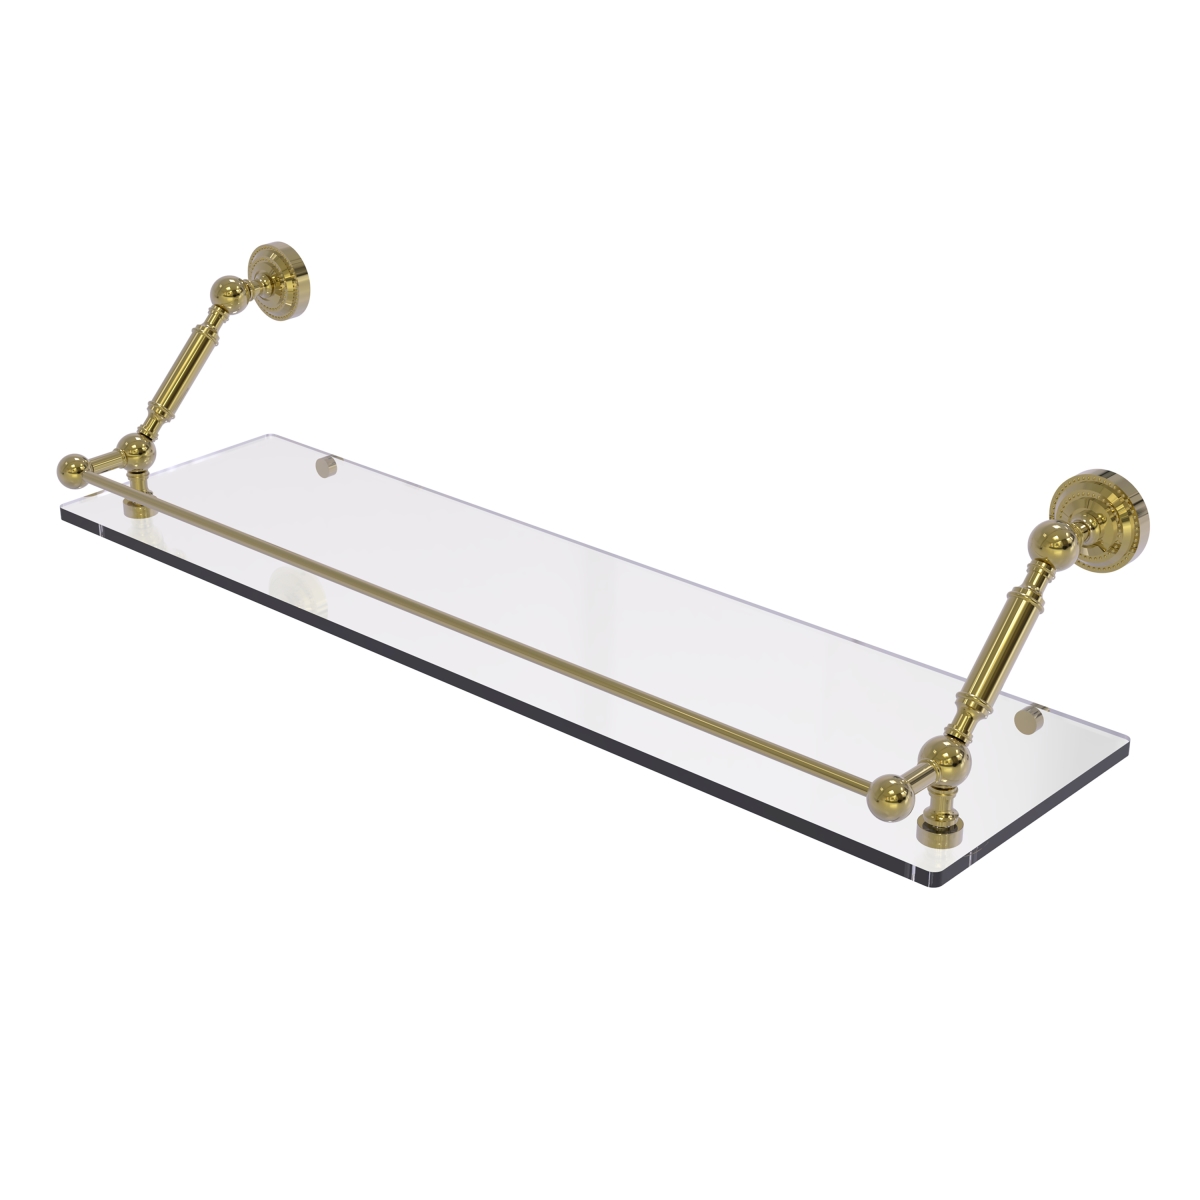 UPC 013895232814 product image for DT-1-30-GAL-UNL 30 in. Dottingham Floating Glass Shelf with Gallery Rail, Unlacq | upcitemdb.com